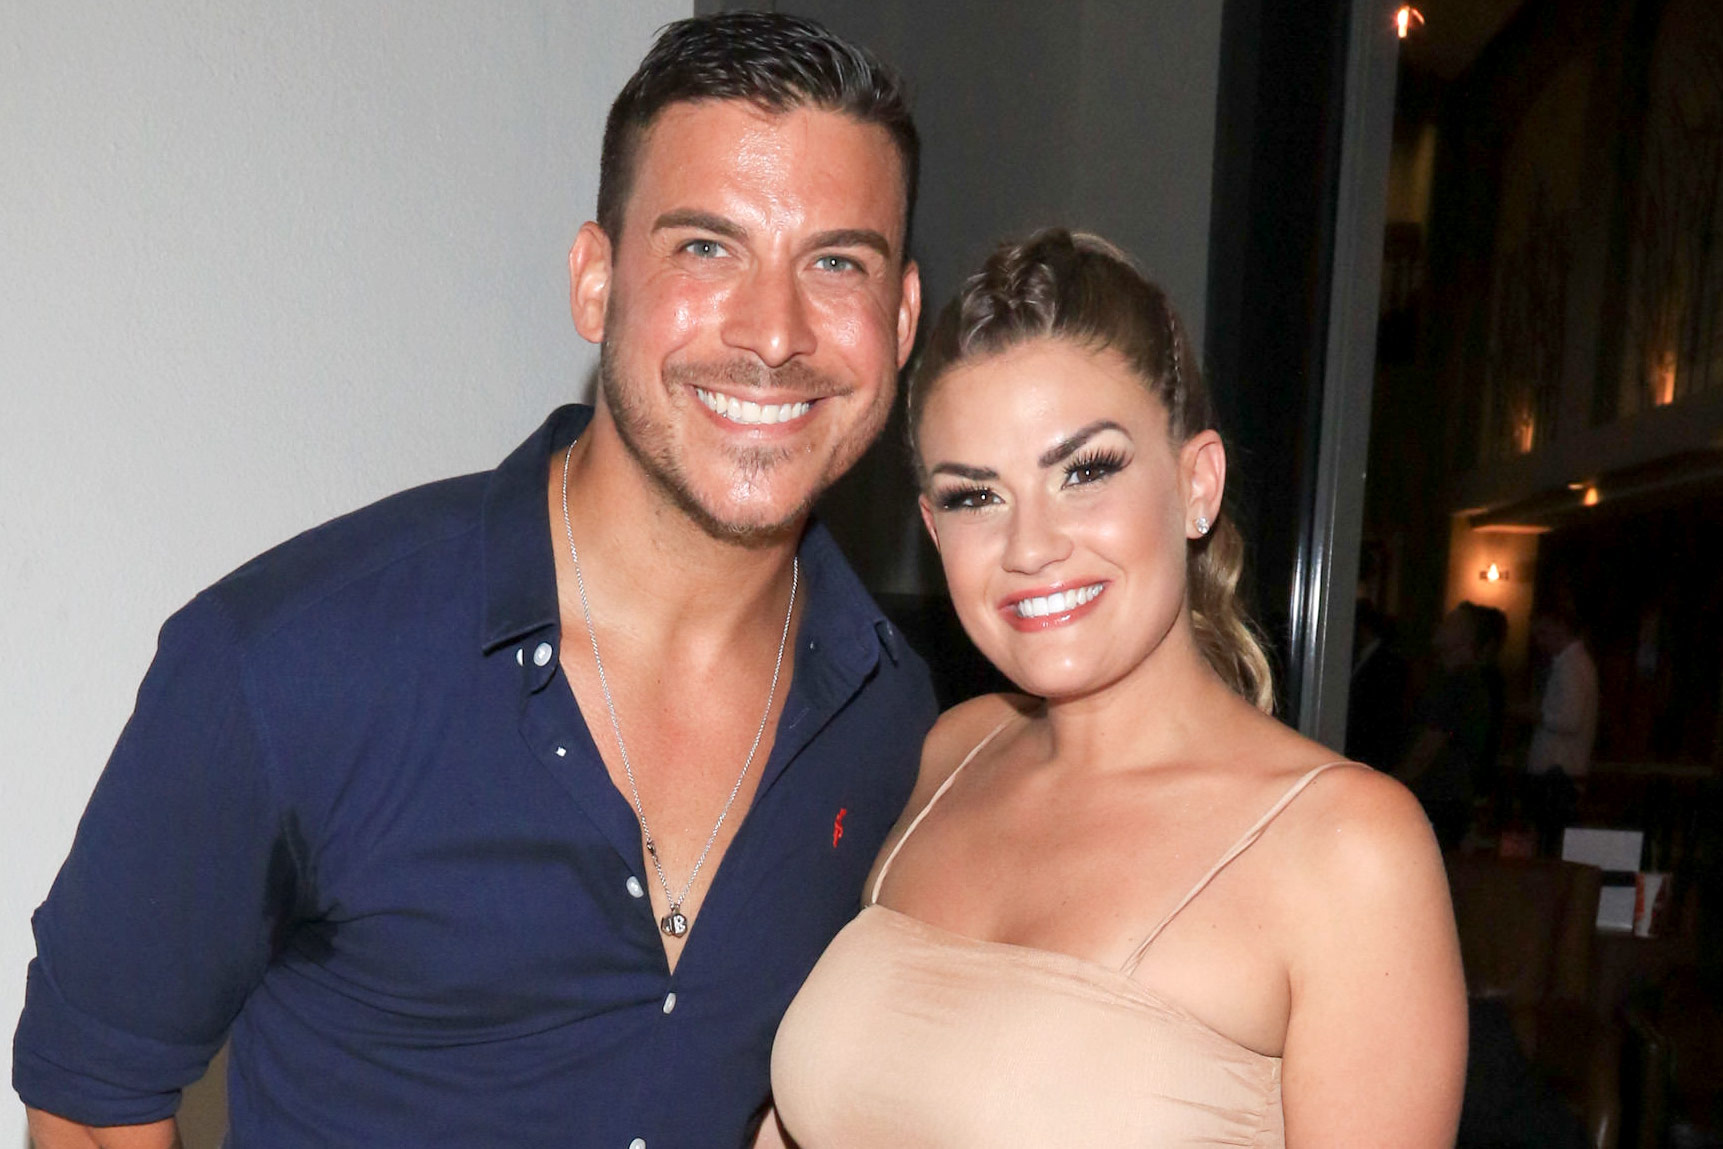 Jax Taylor responds to divorce rumors with wife Brittany Cartwright.